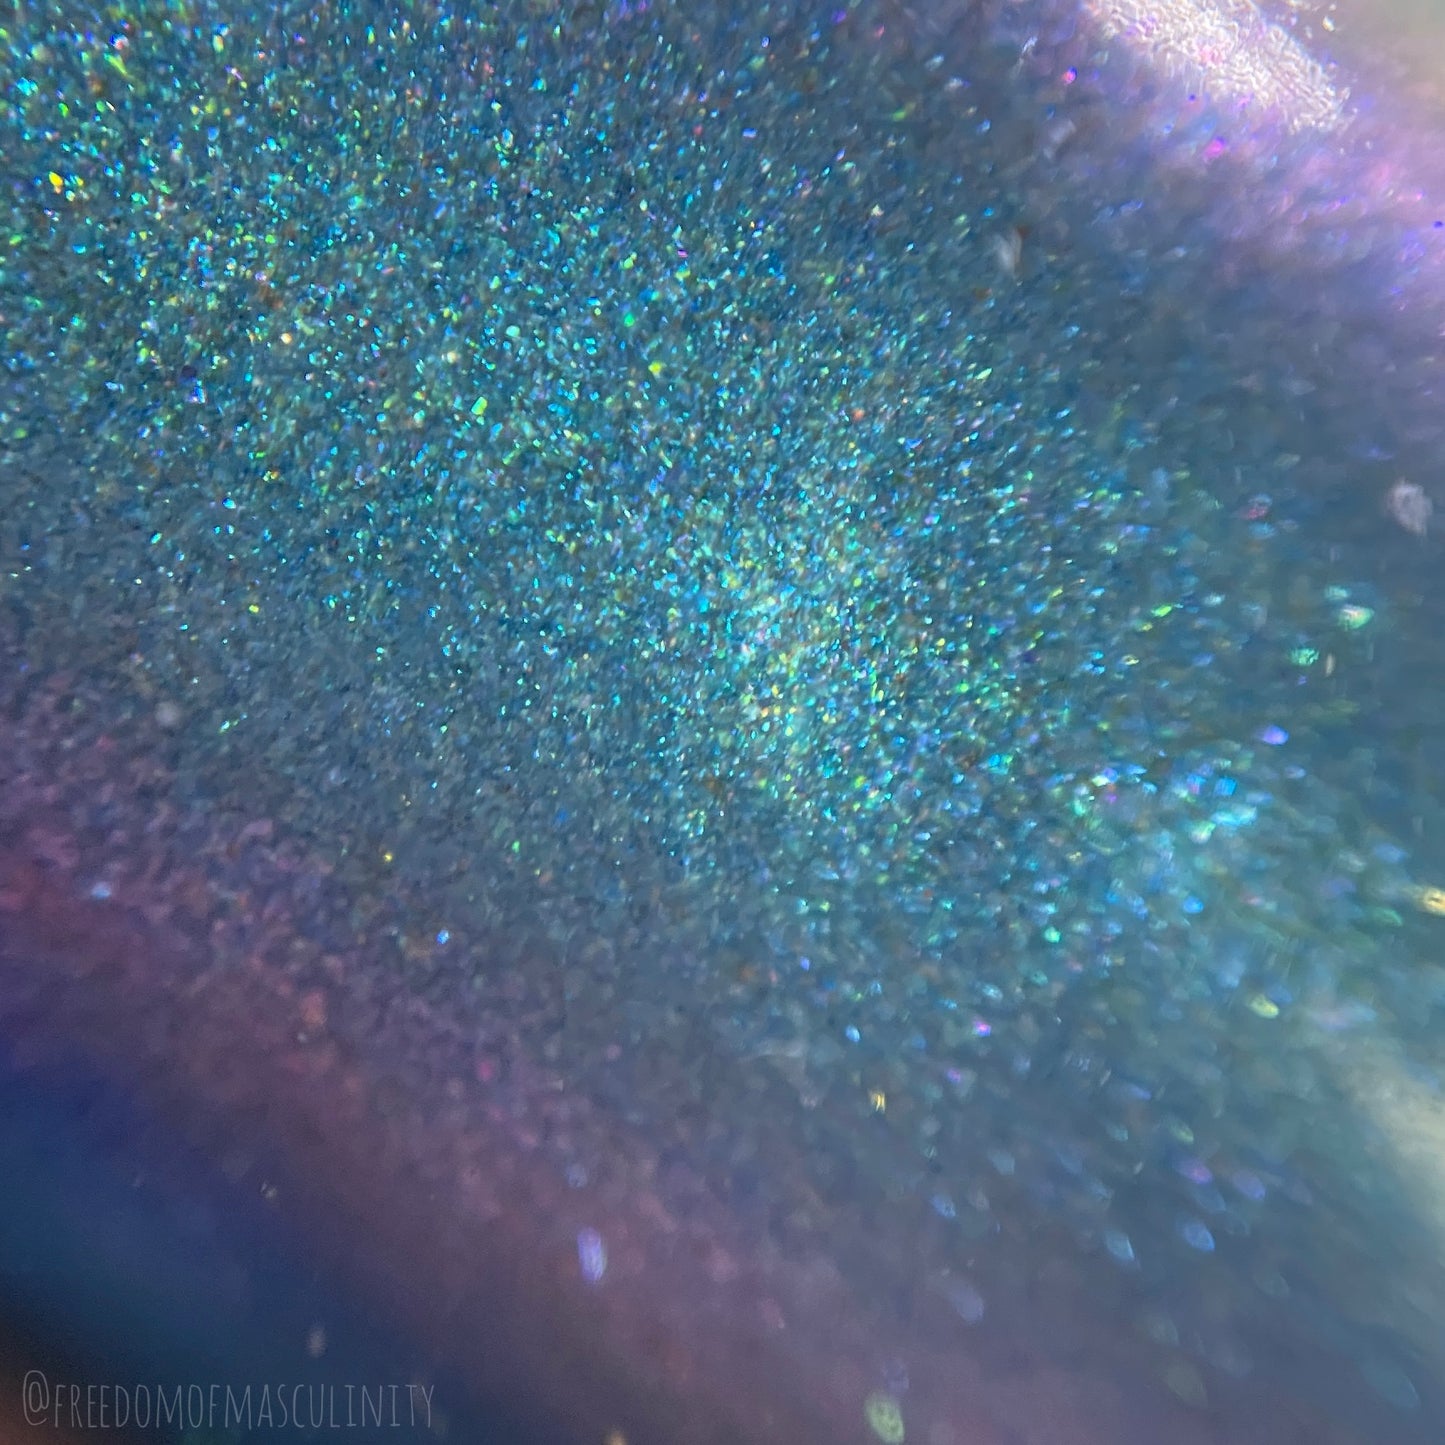 deep dive Into The Pit shows blue shimmer in center with purple showing on edges